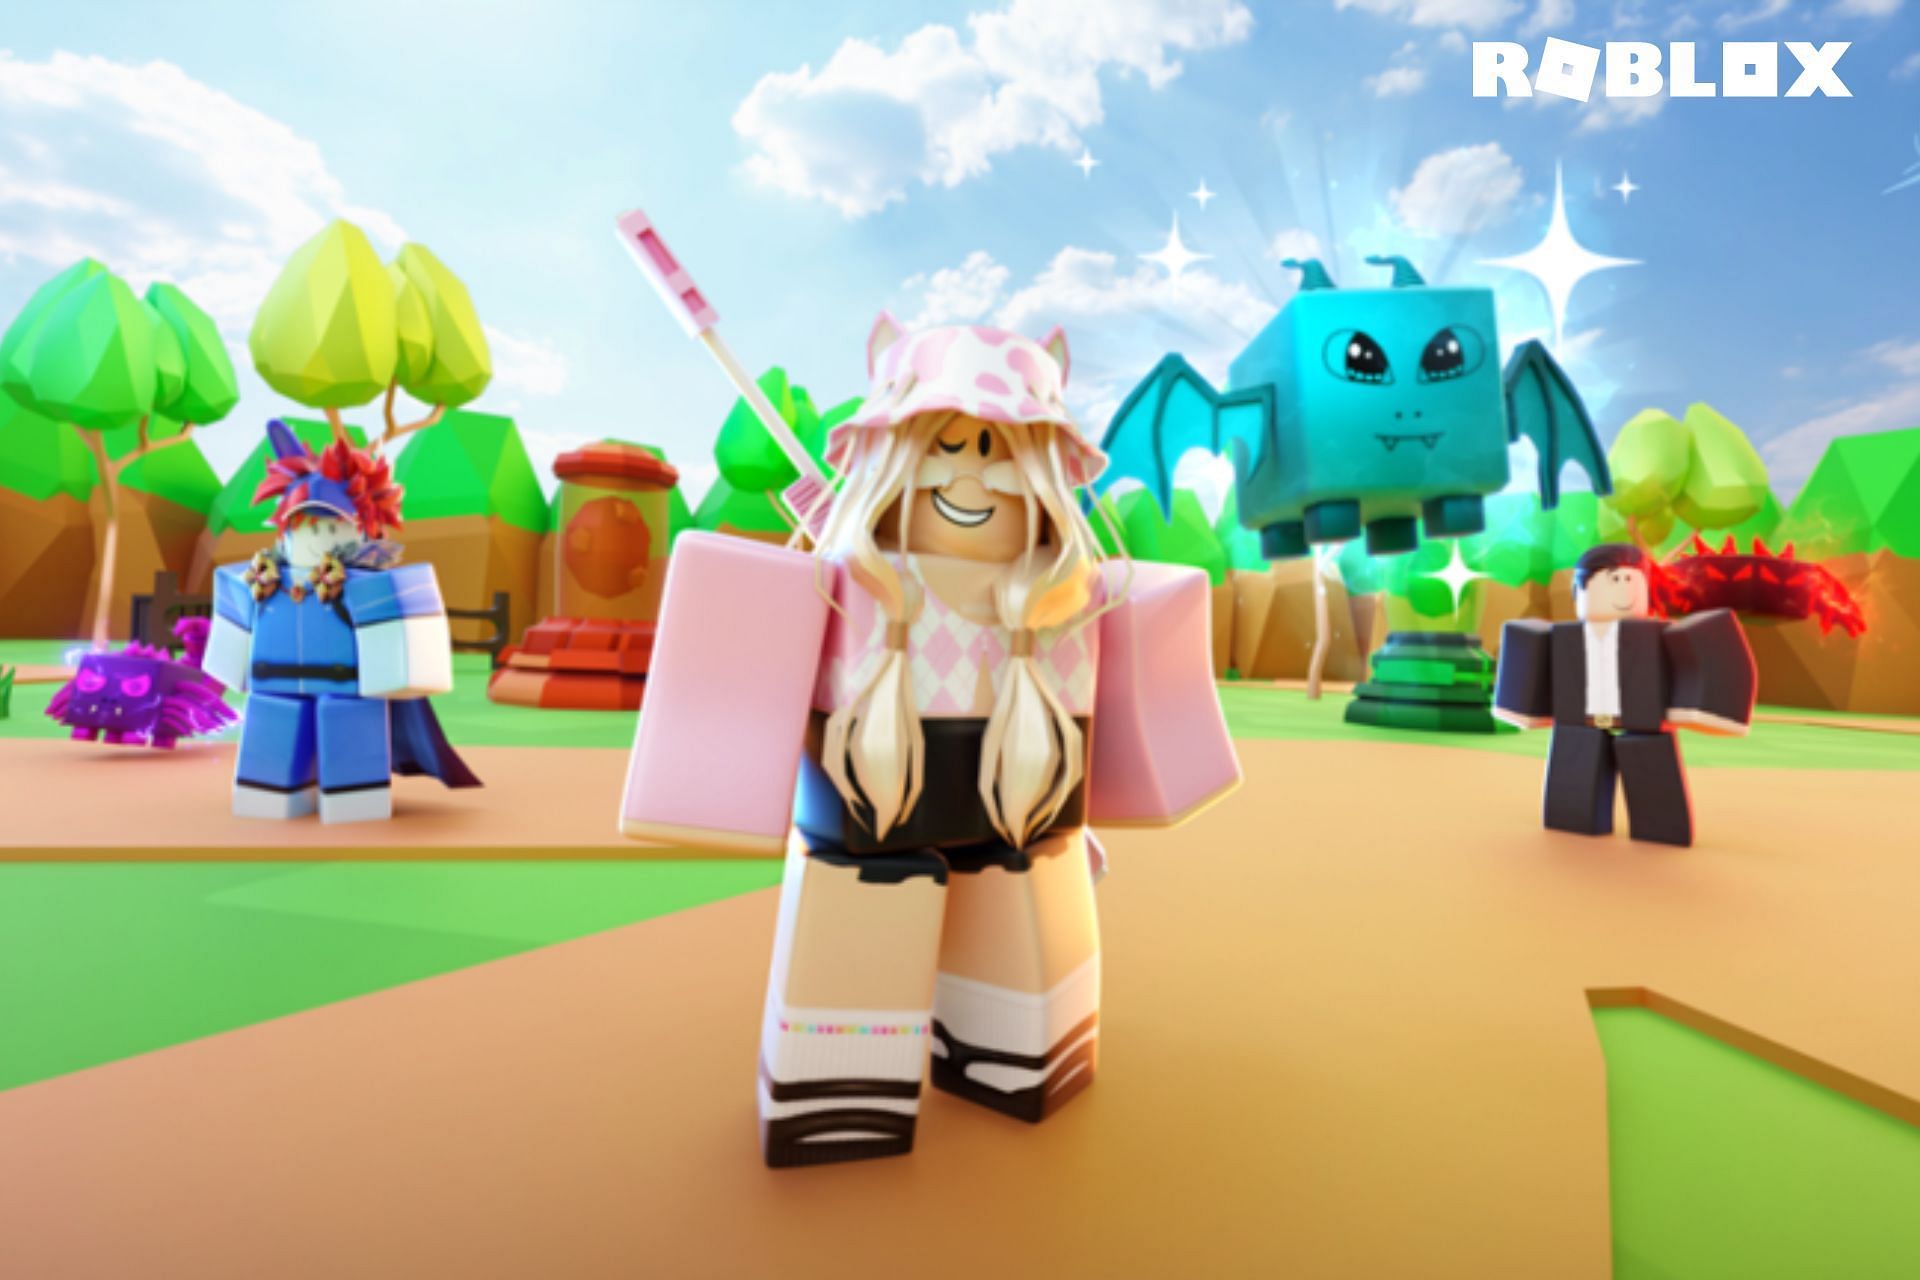 🍀 Test Your Luck! [UPDATE!] - Roblox